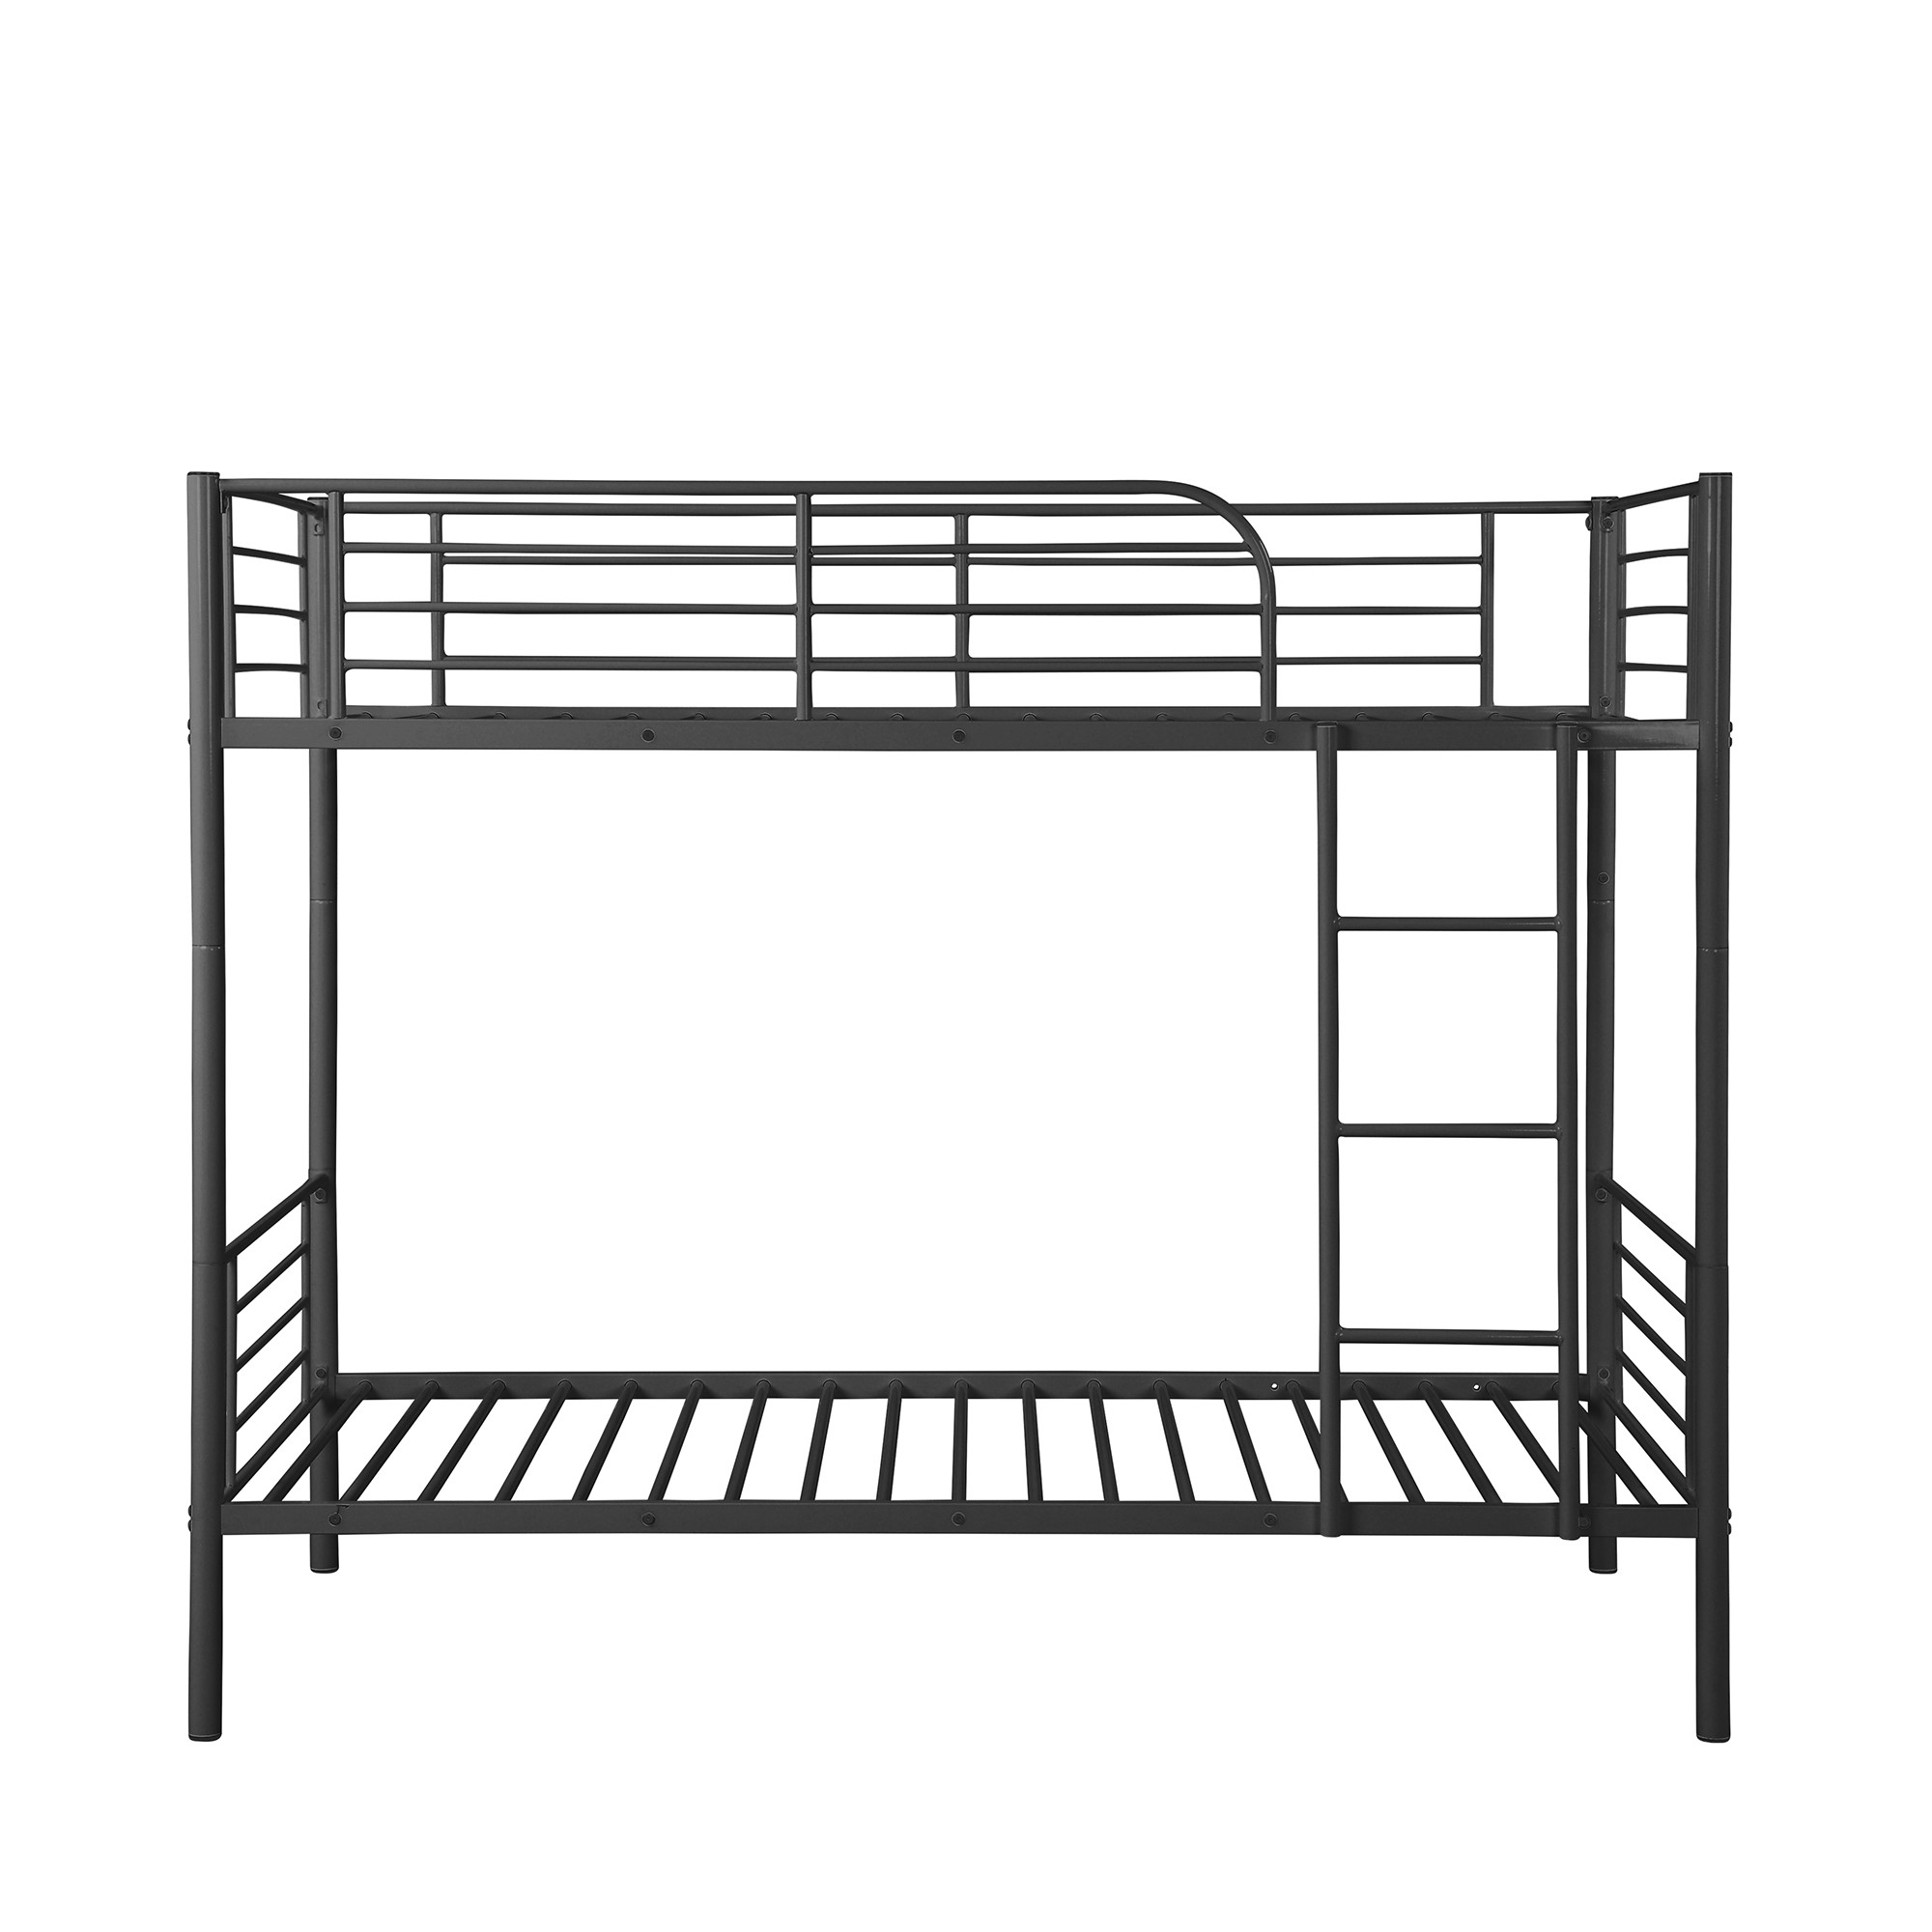 High Load Carrying Queen Twin Bunk Beds Sturdy Construction With Stairs